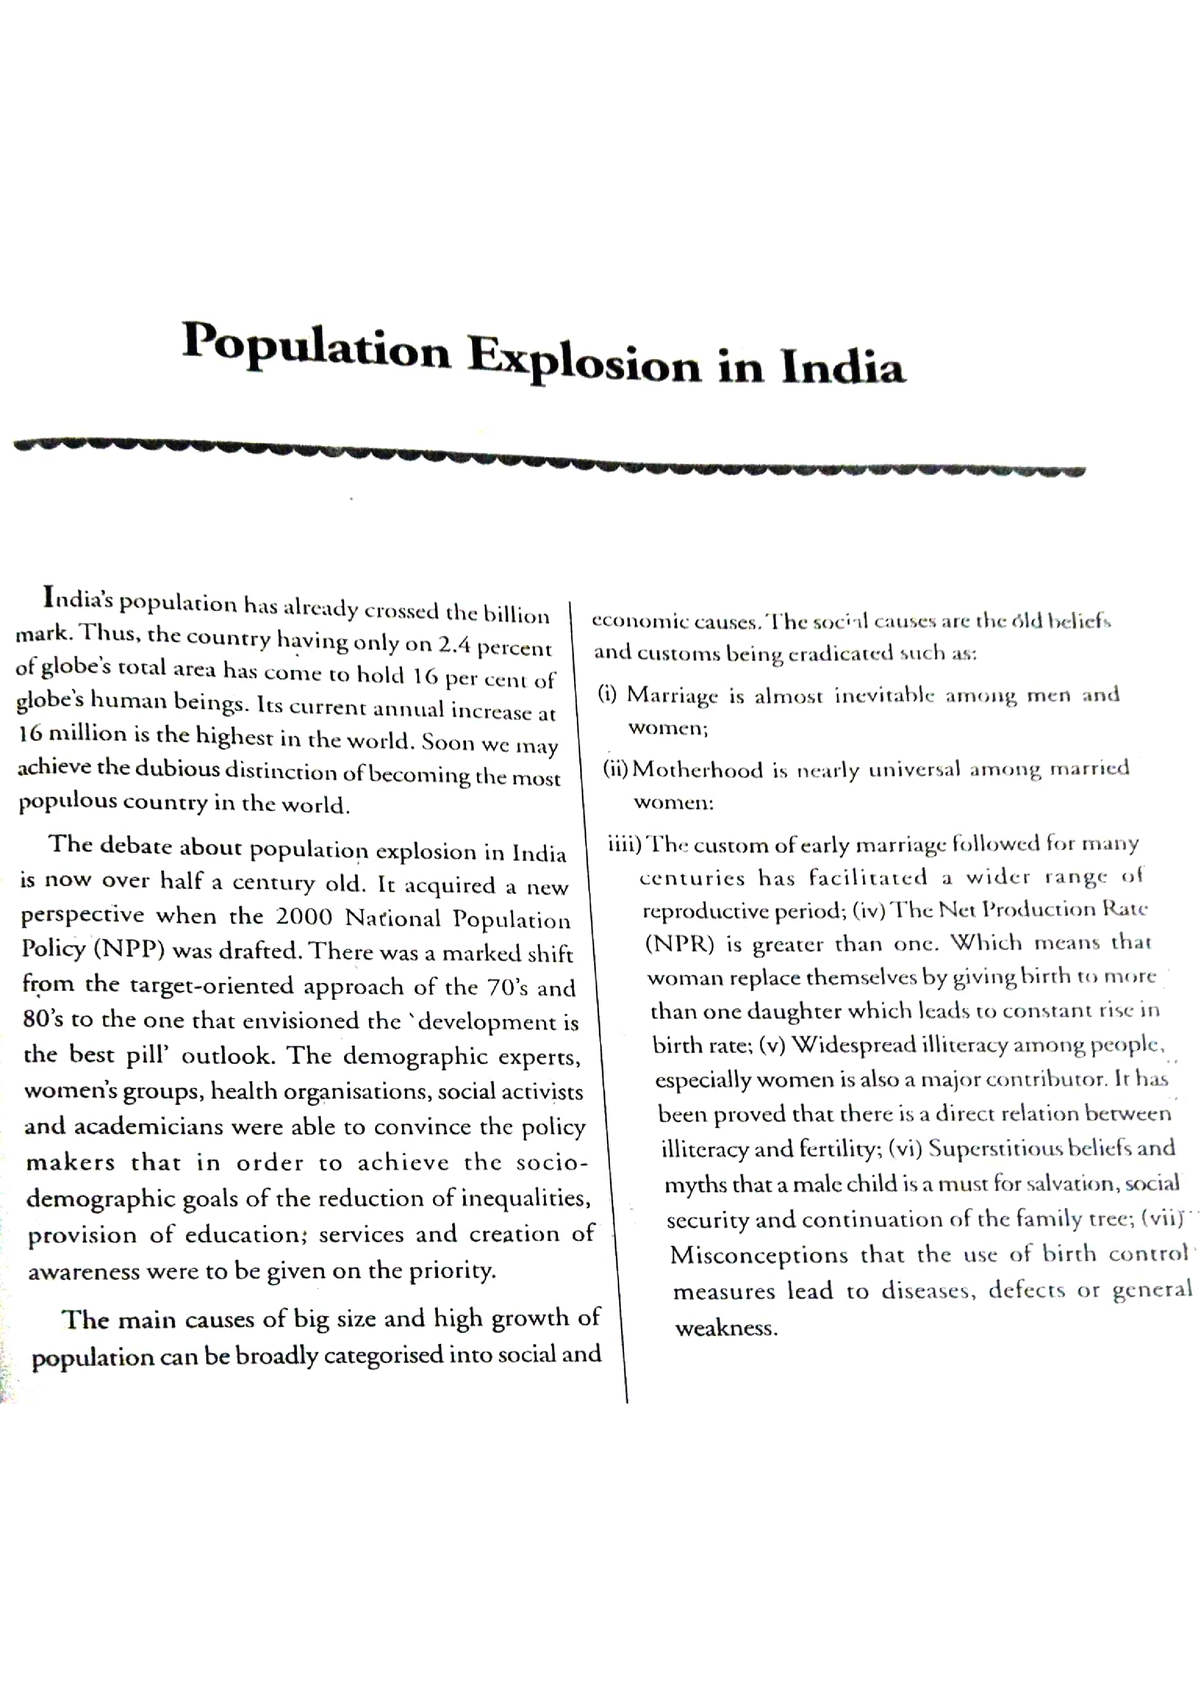 essay on population explosion in india